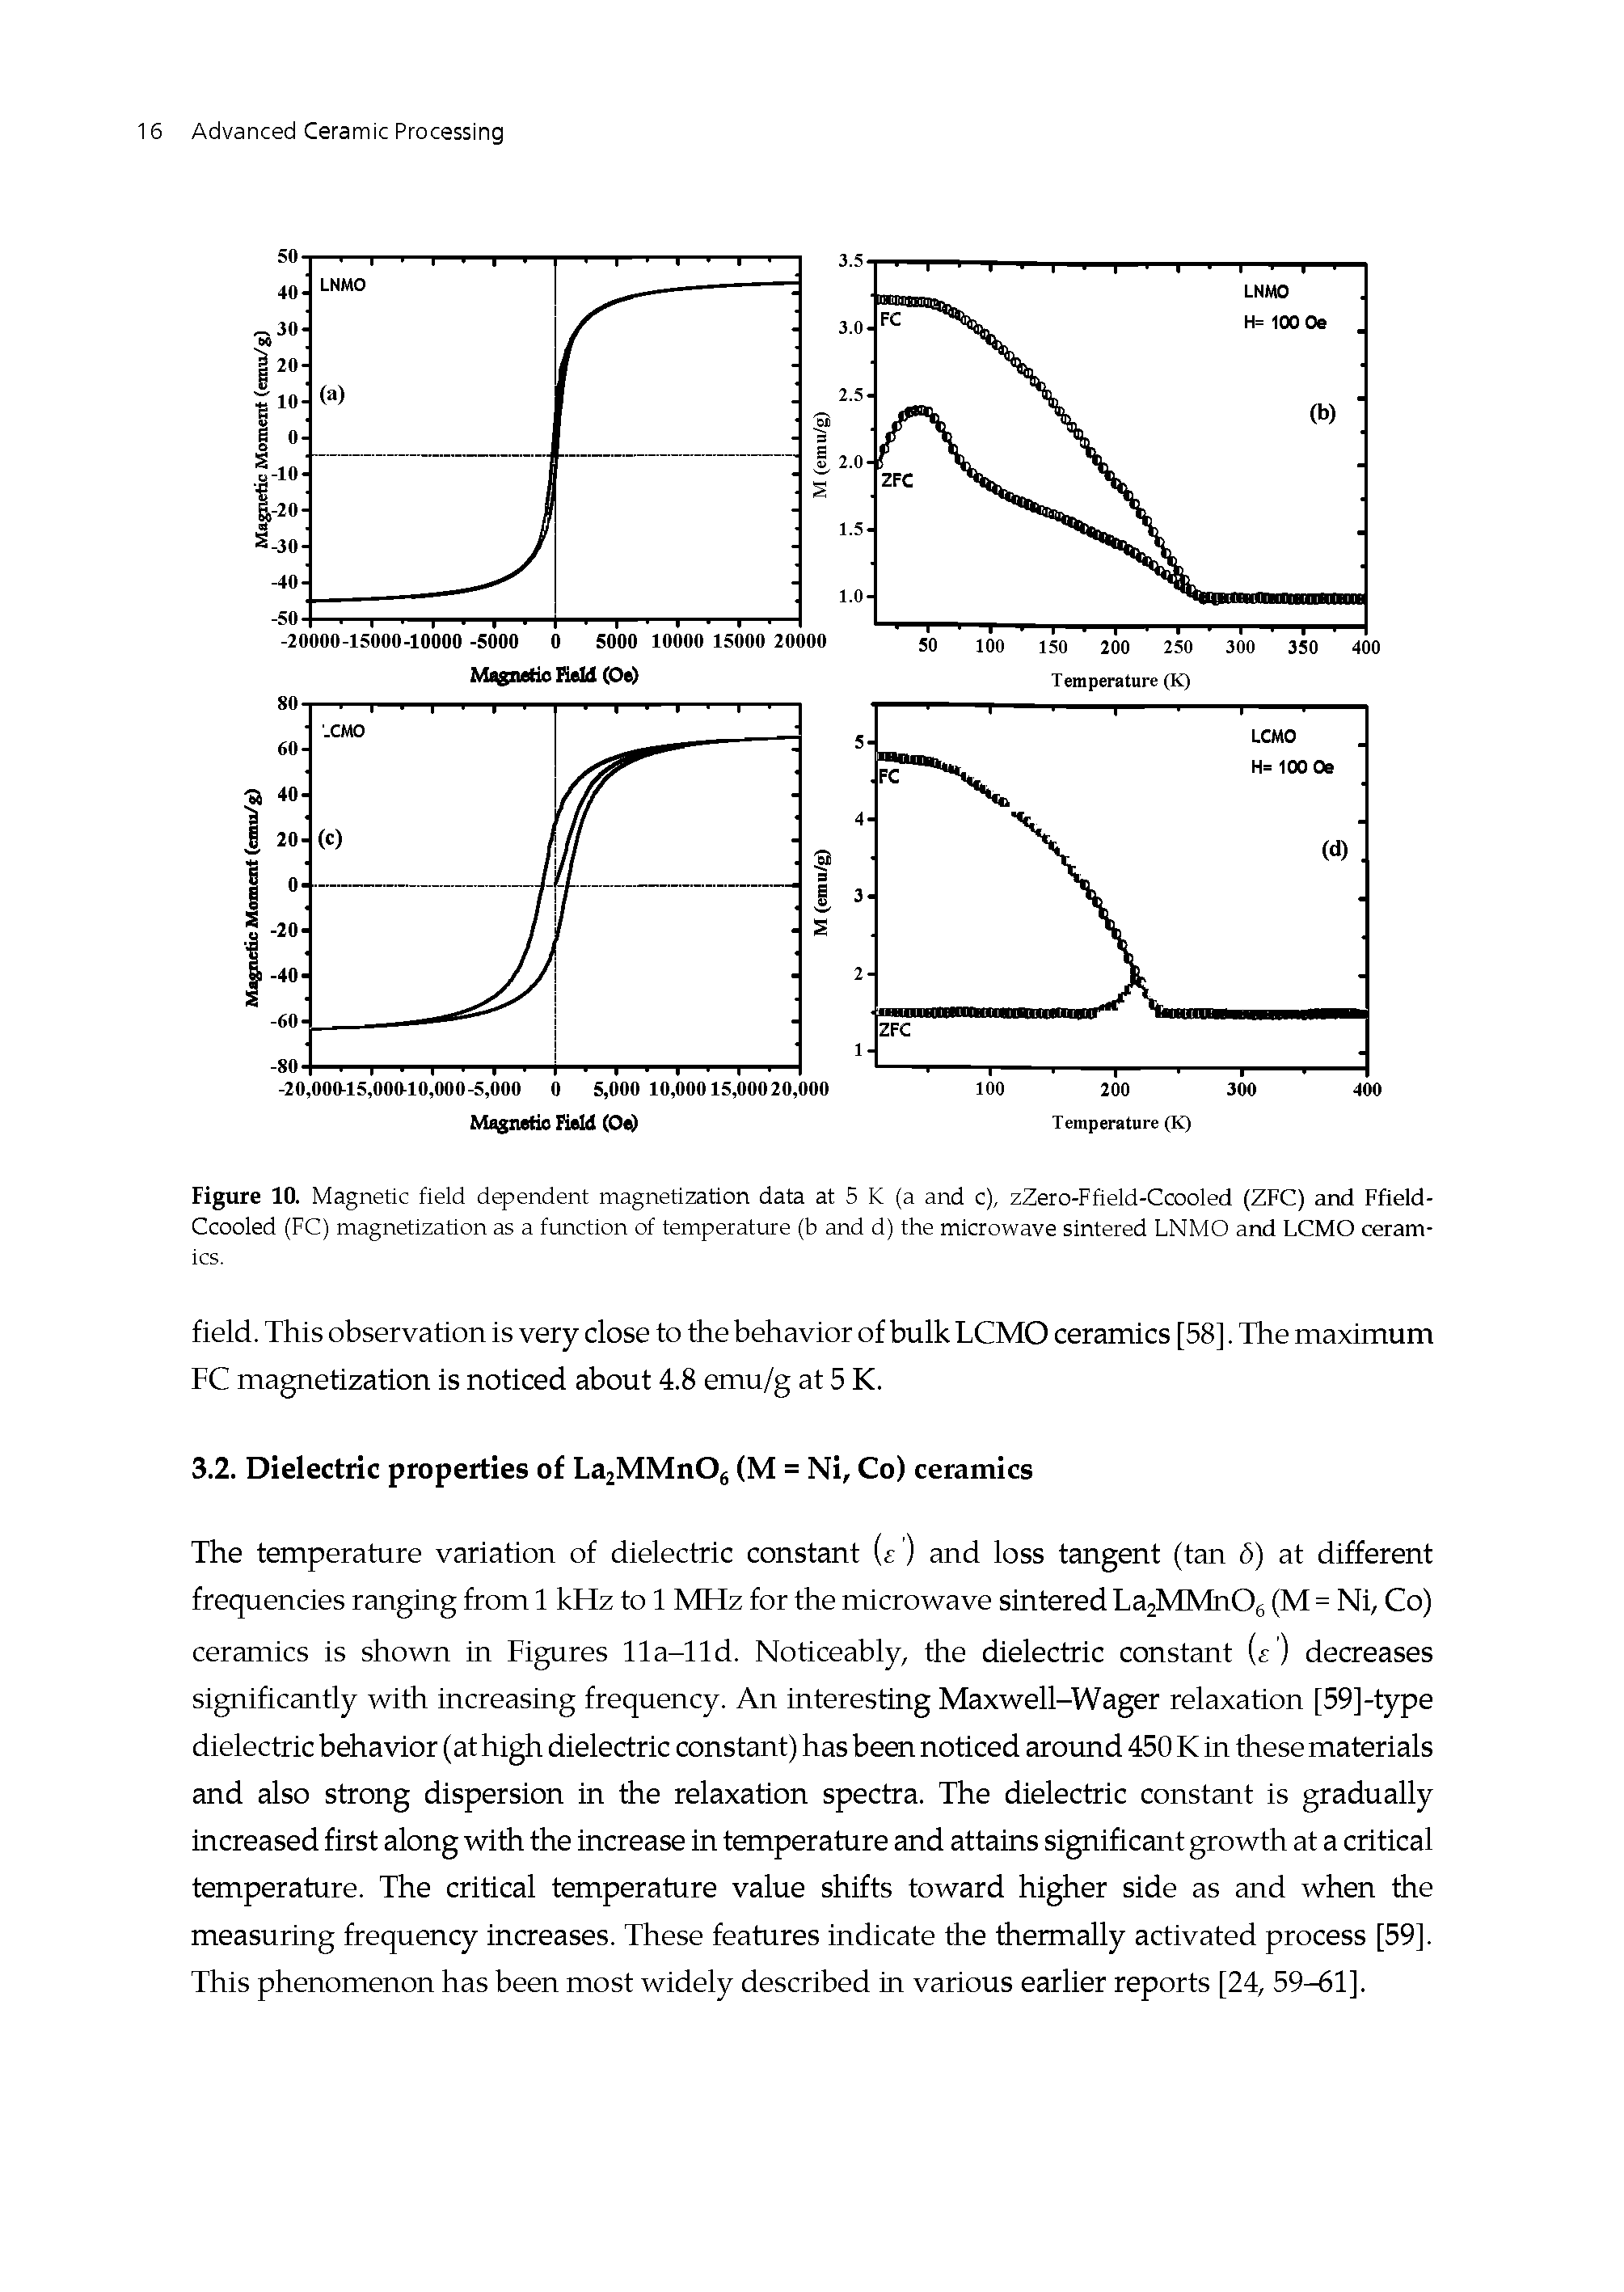 Figure 10. Magnetic field dependent magnetization data at 5 K (a and c), zZero-Ffield-Ccooled (ZFC) and Ffield-Ccooled (FC) magnetization as a function of temperature (b and d) the microwave sintered LNMO and LCMO ceramics.